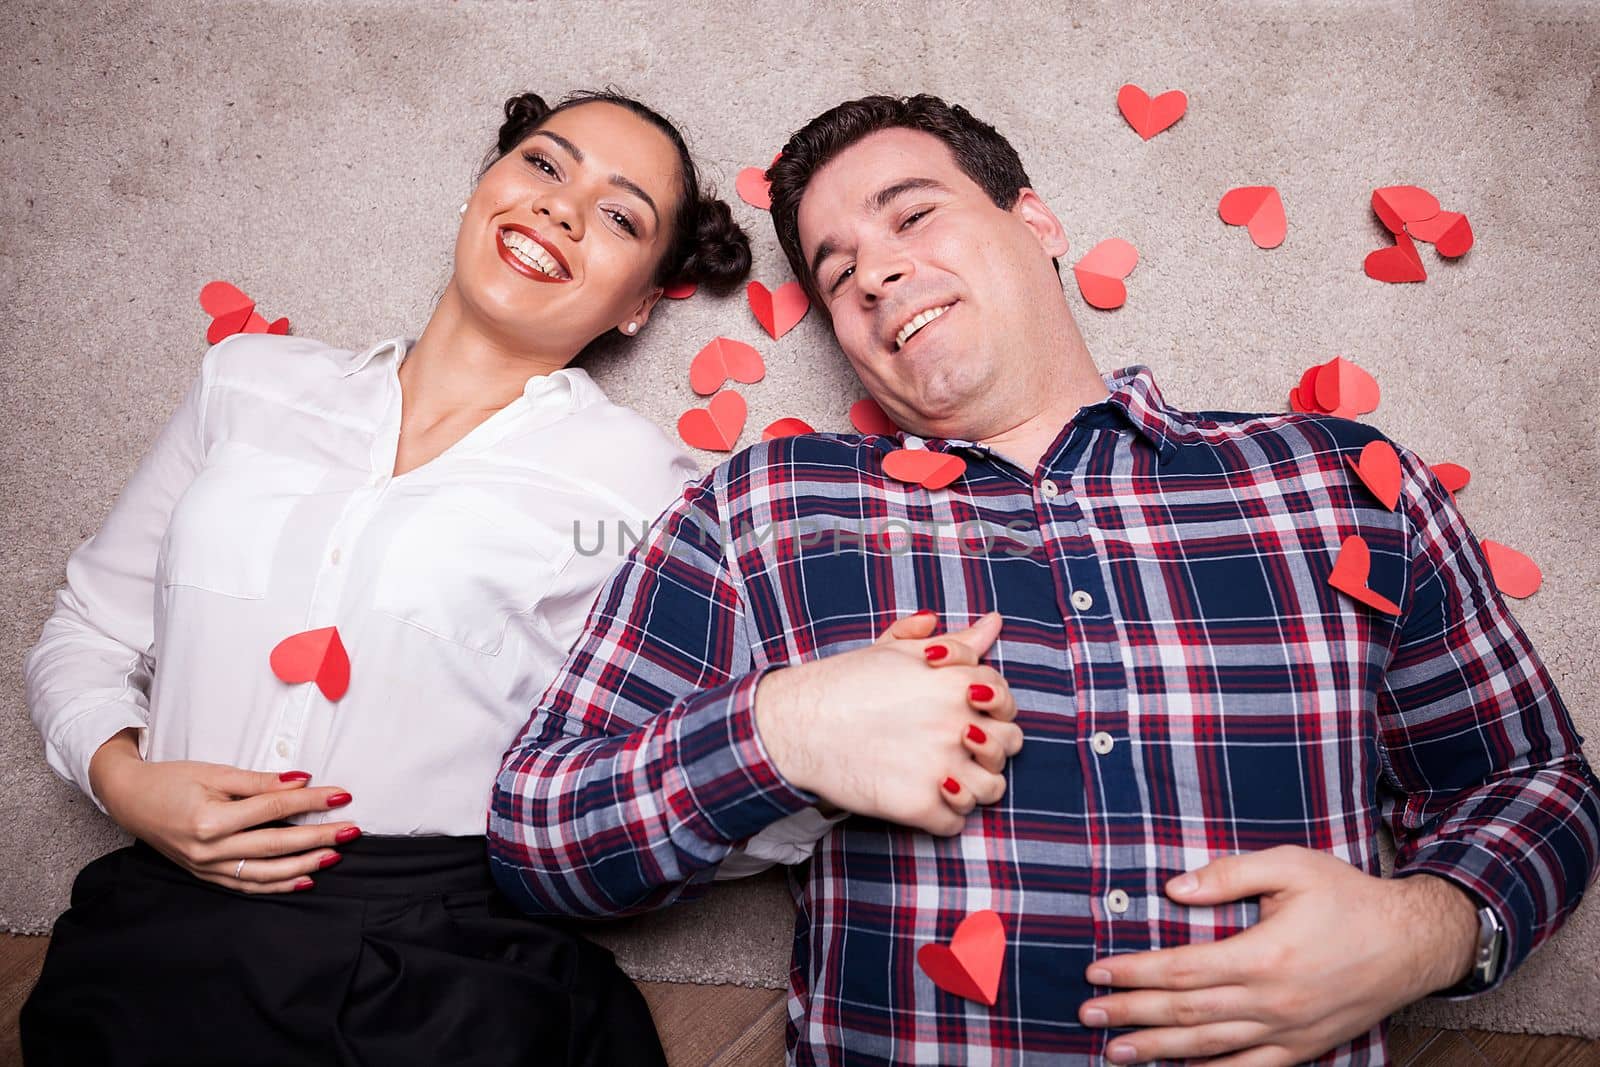 Amazing inlove couple looking at camera while lying on the floor next to small red hearts